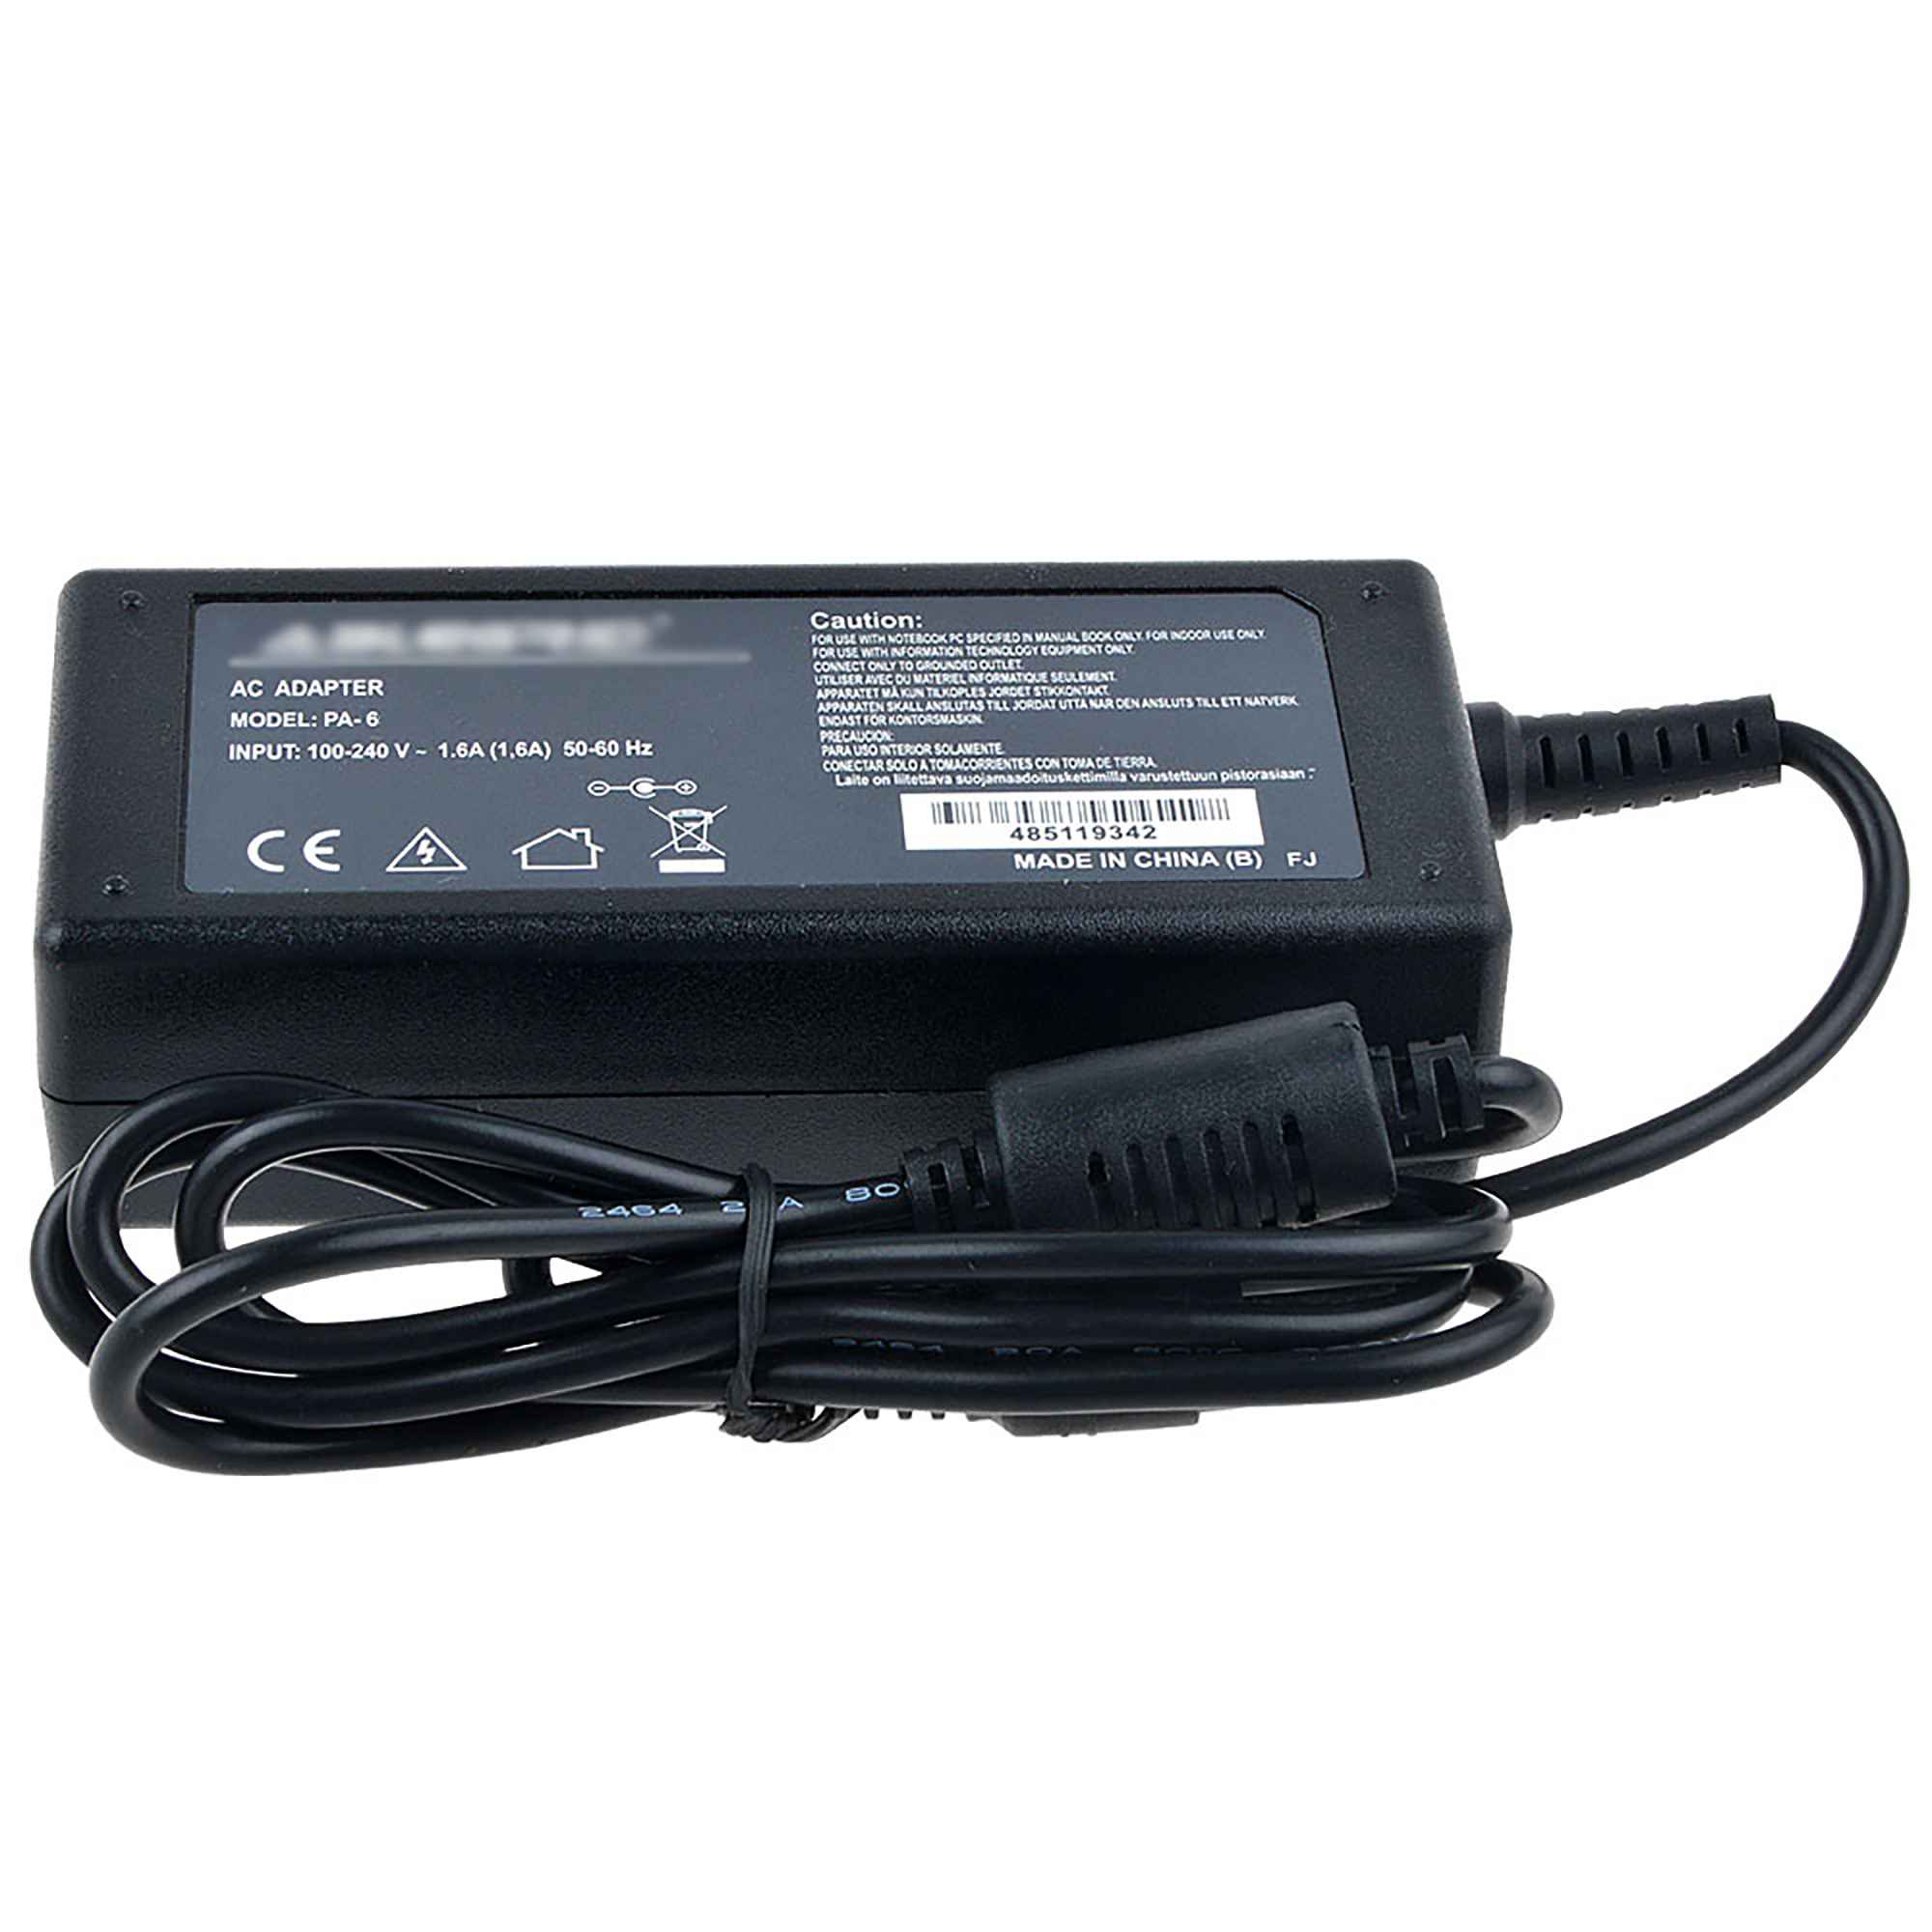 PKPOWER 65W DC Adapter Charger Replacement for Intel NUC NUC7I7BNH BOXNUC7I7BNH NUC7i5BNH PSU - image 5 of 5